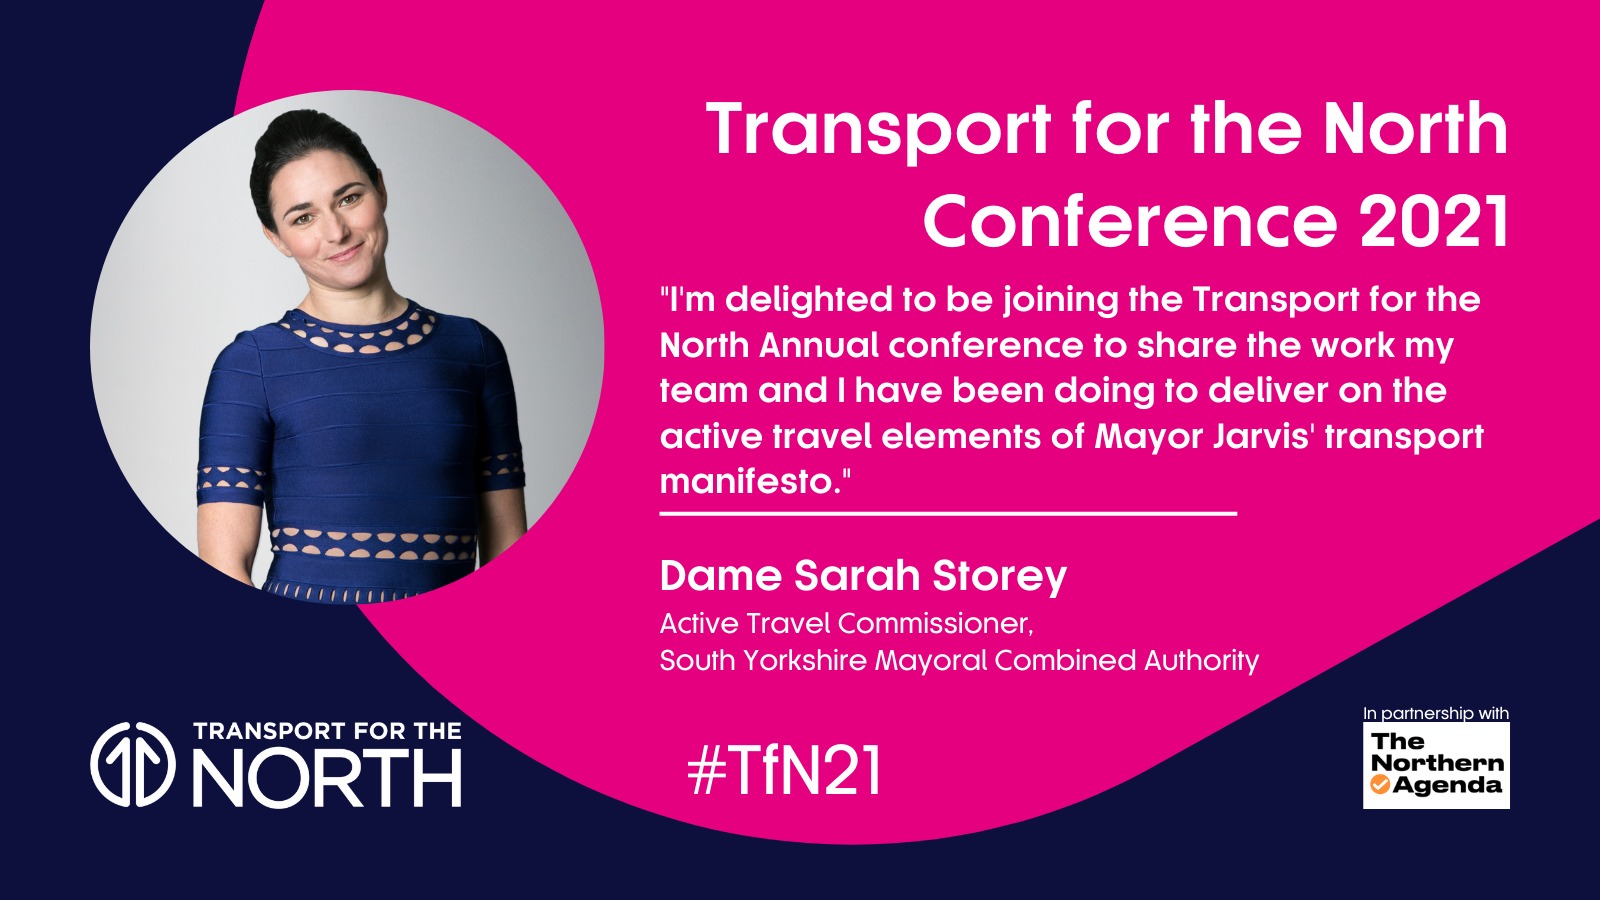 Dame Sarah Storey announced as speaker at Transport for the North's Annual Conference 2021